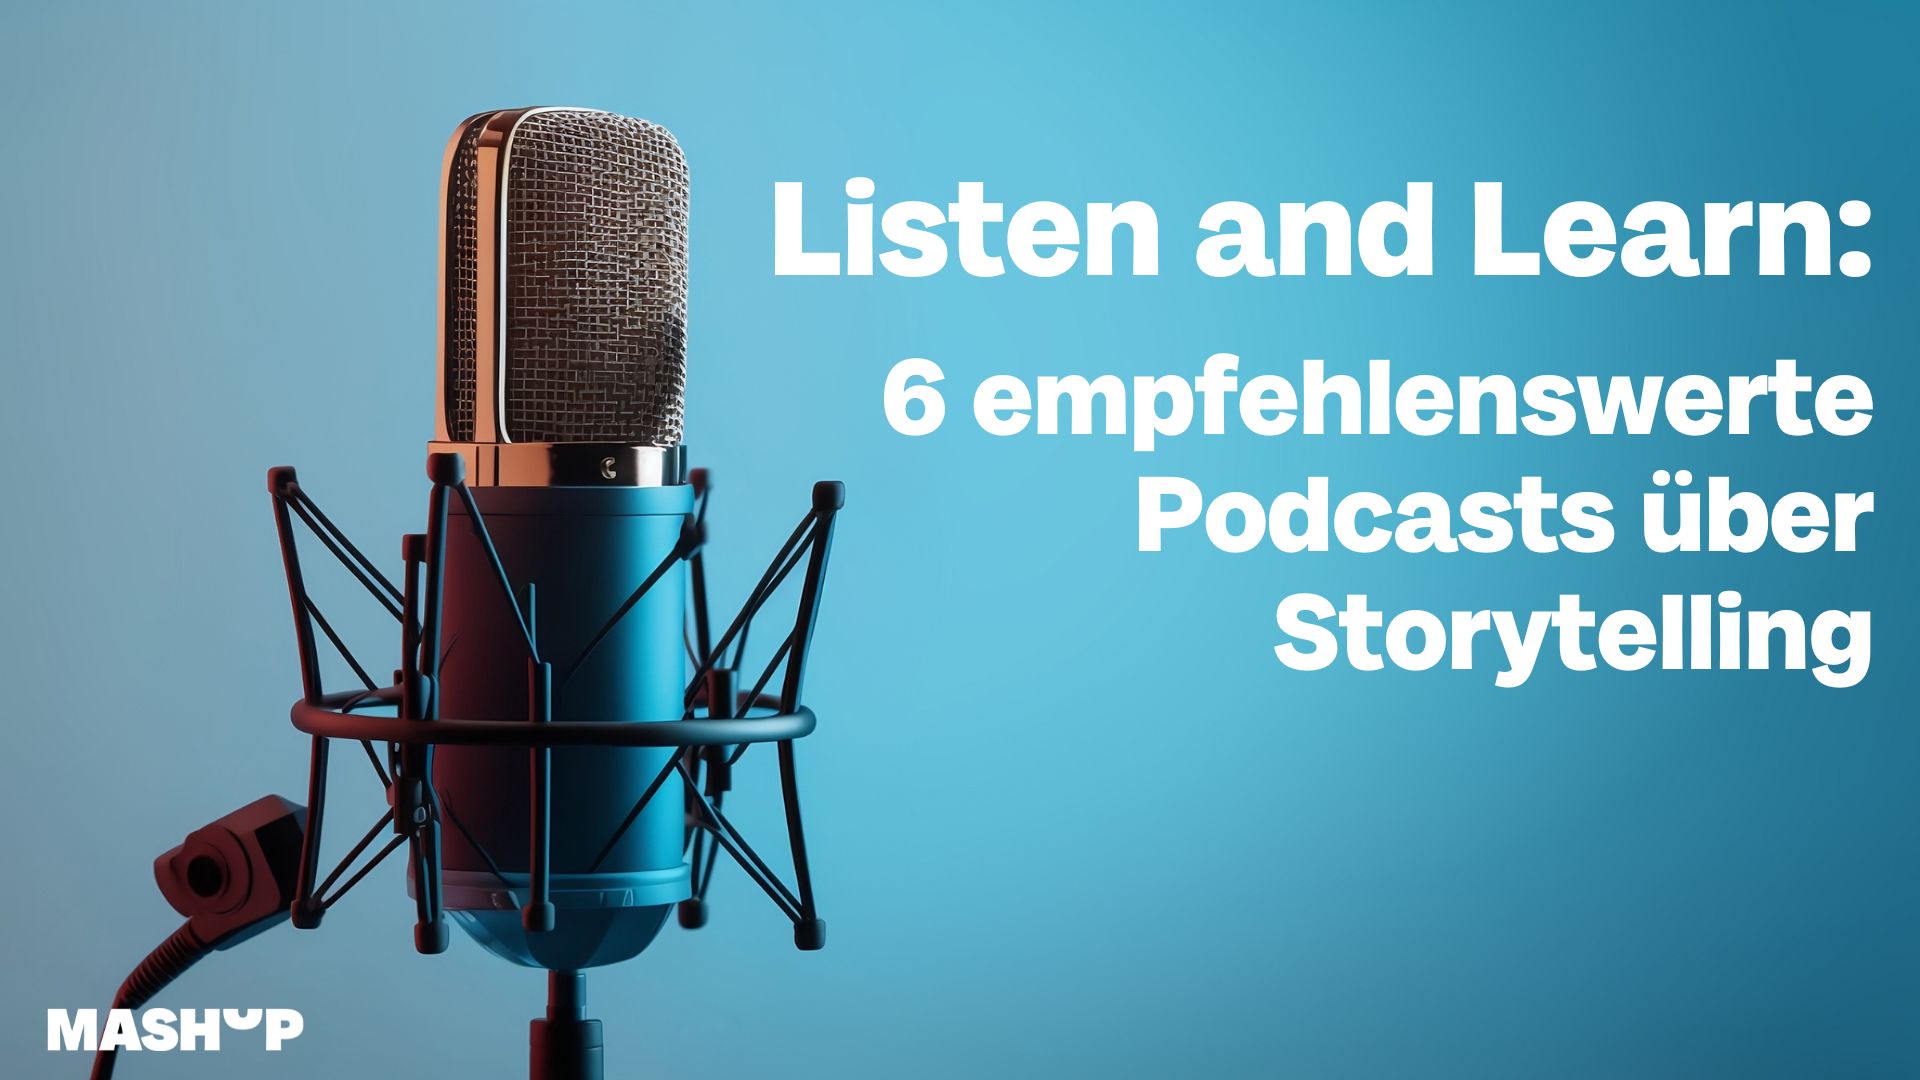 Listen and Learn: 6 empfehlenswerte Podcasts über Storytelling